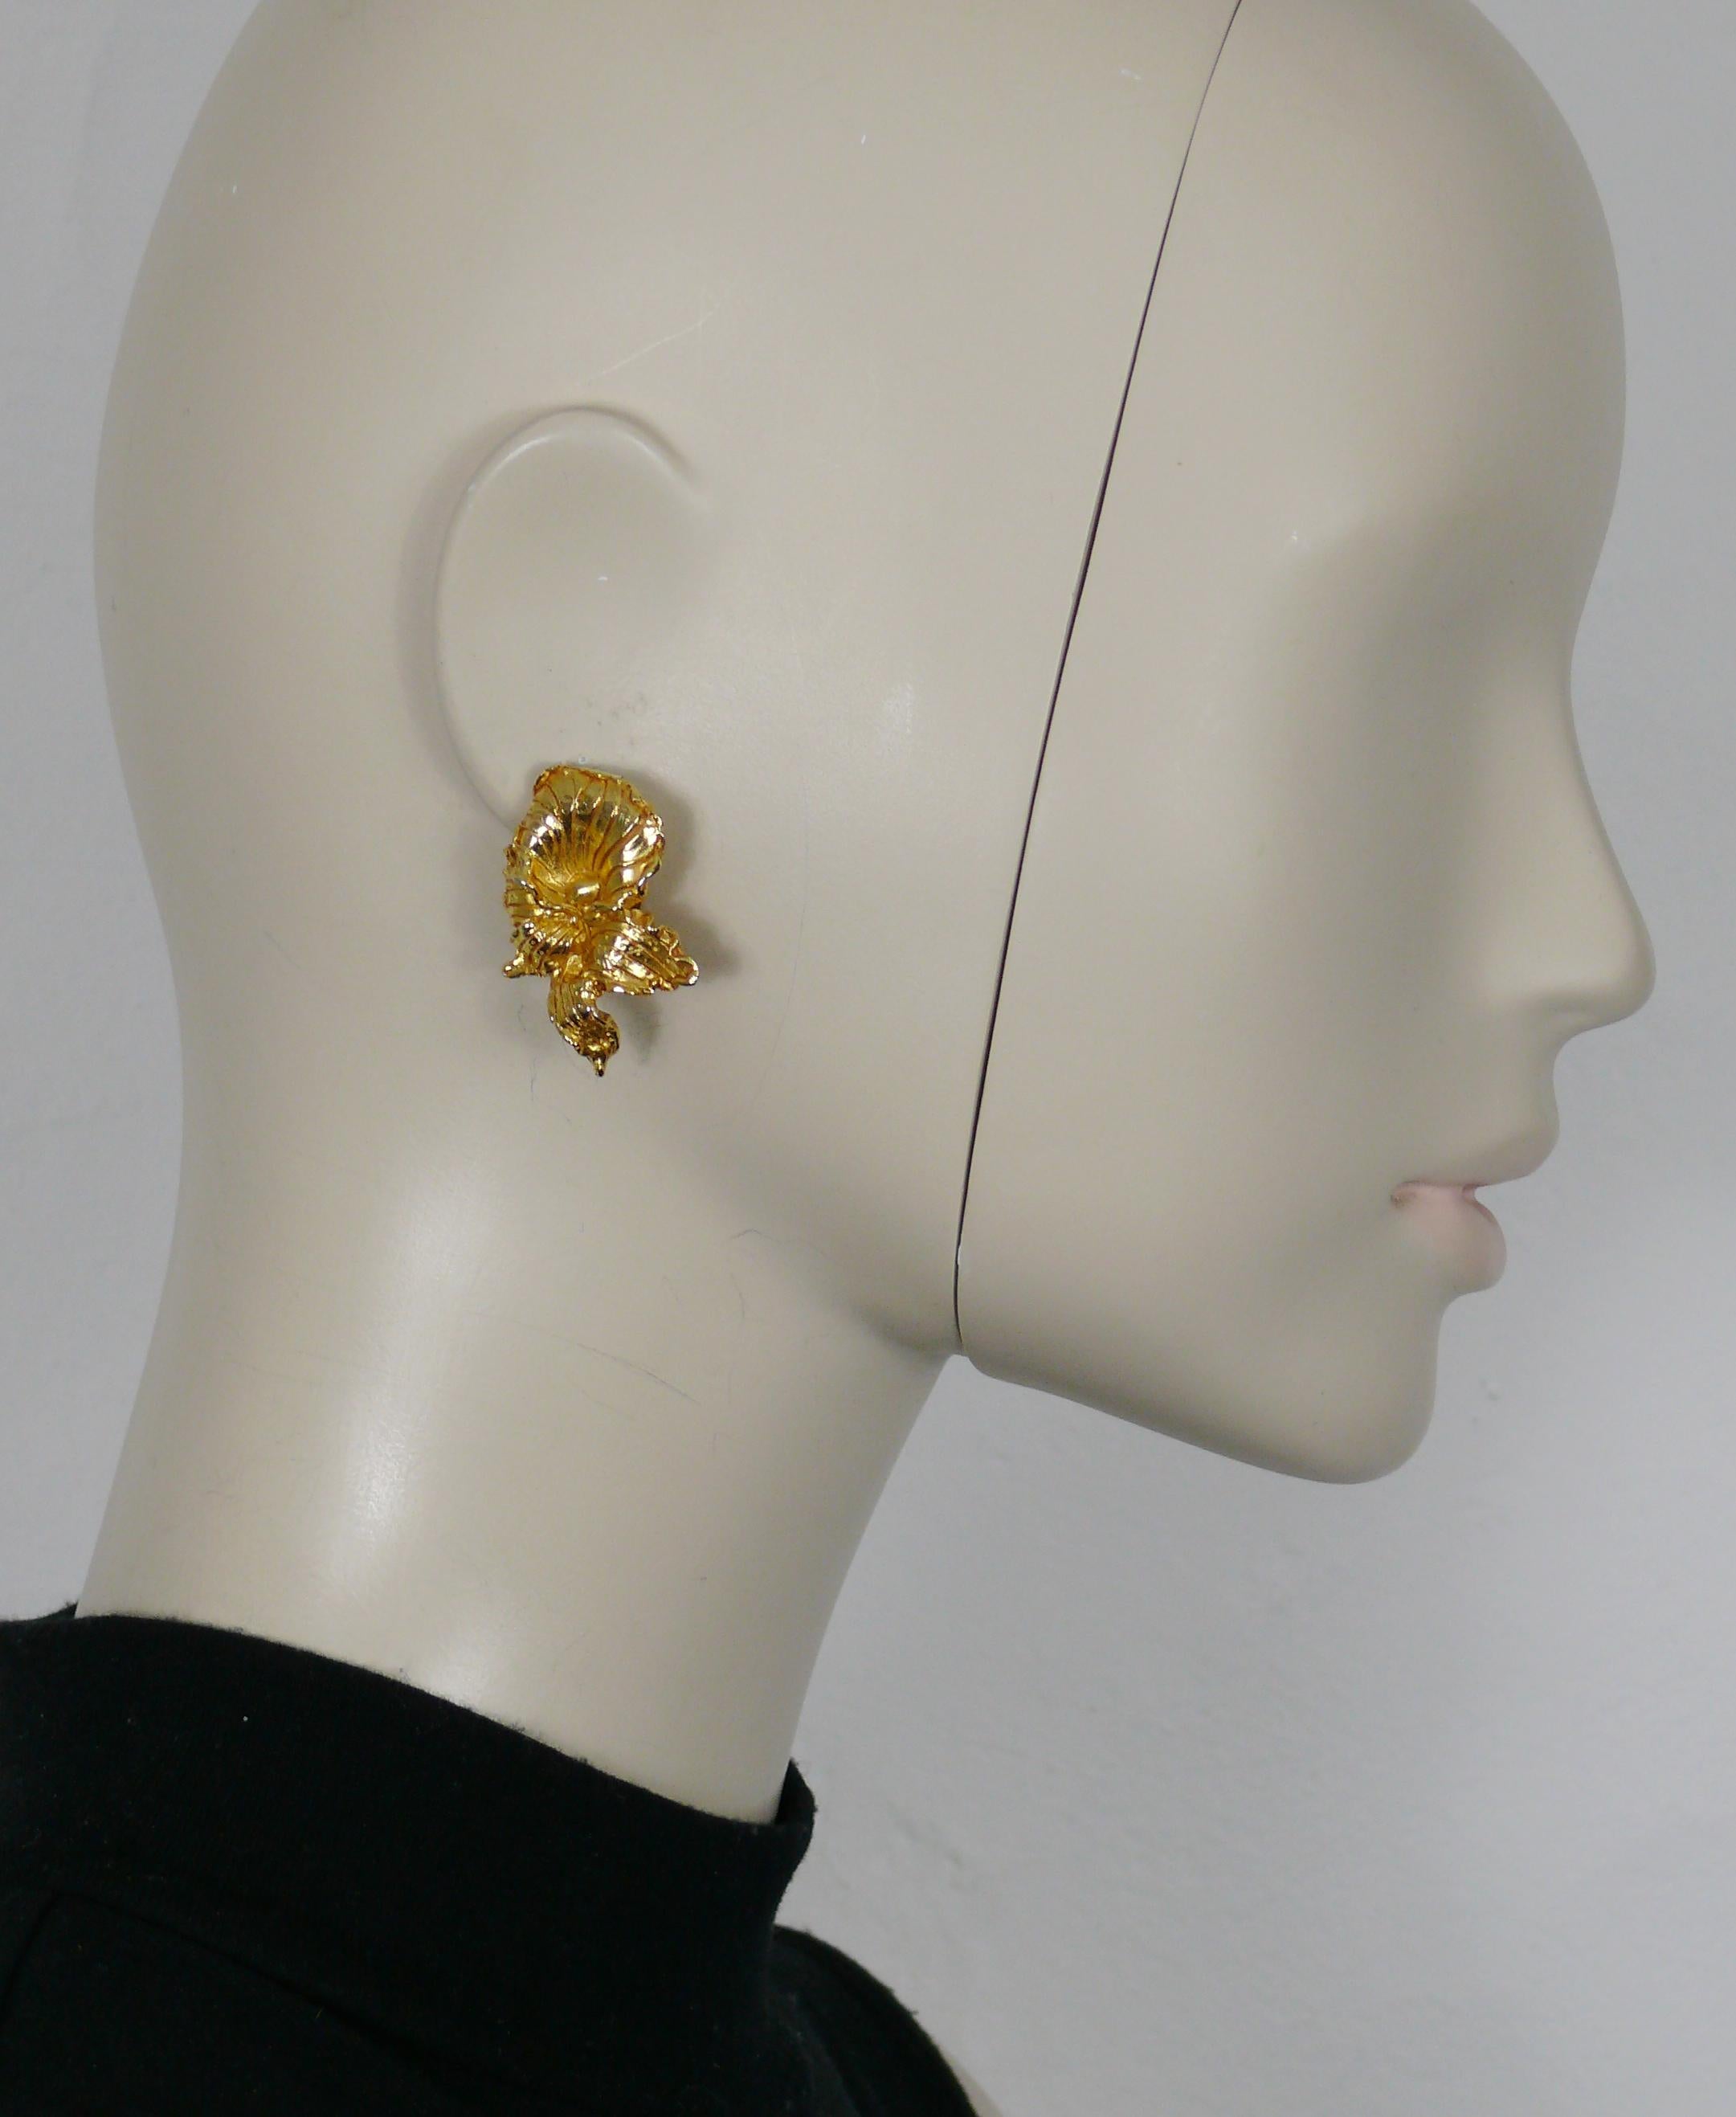 LEONARD PARIS vintage gold tone orchid clip-on earrings.

Embossed LEONARD PARIS.

Indicative measurements : height approx. 3.5 cm (1.38 inches) / max. width approx. 2.7 cm (1.06 inches).

Weight per earring : approx. 9 grams.

Materials : Gold tone